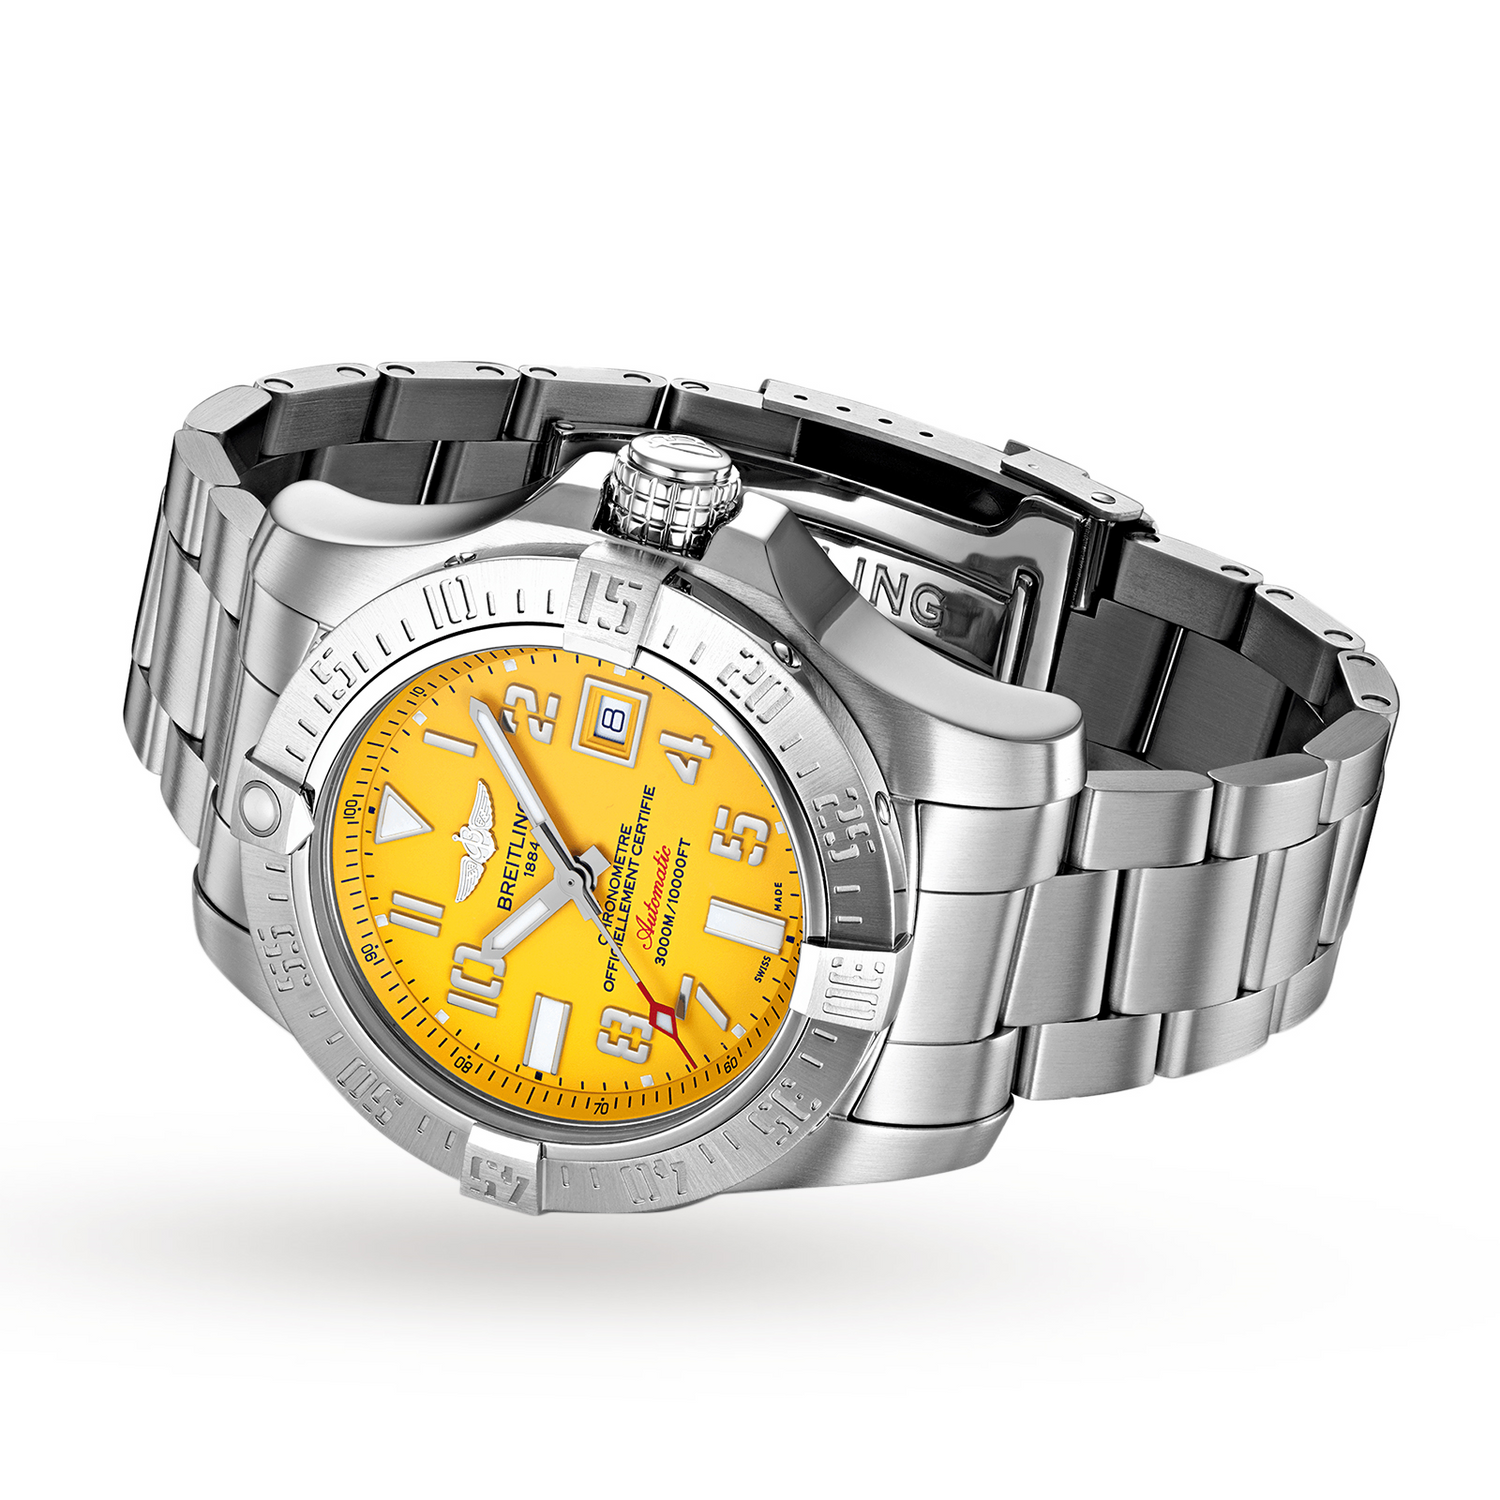 BREITLING Avenger II Seawolf A17331101I1A1 Stainless Steel Yellow Men's Watch